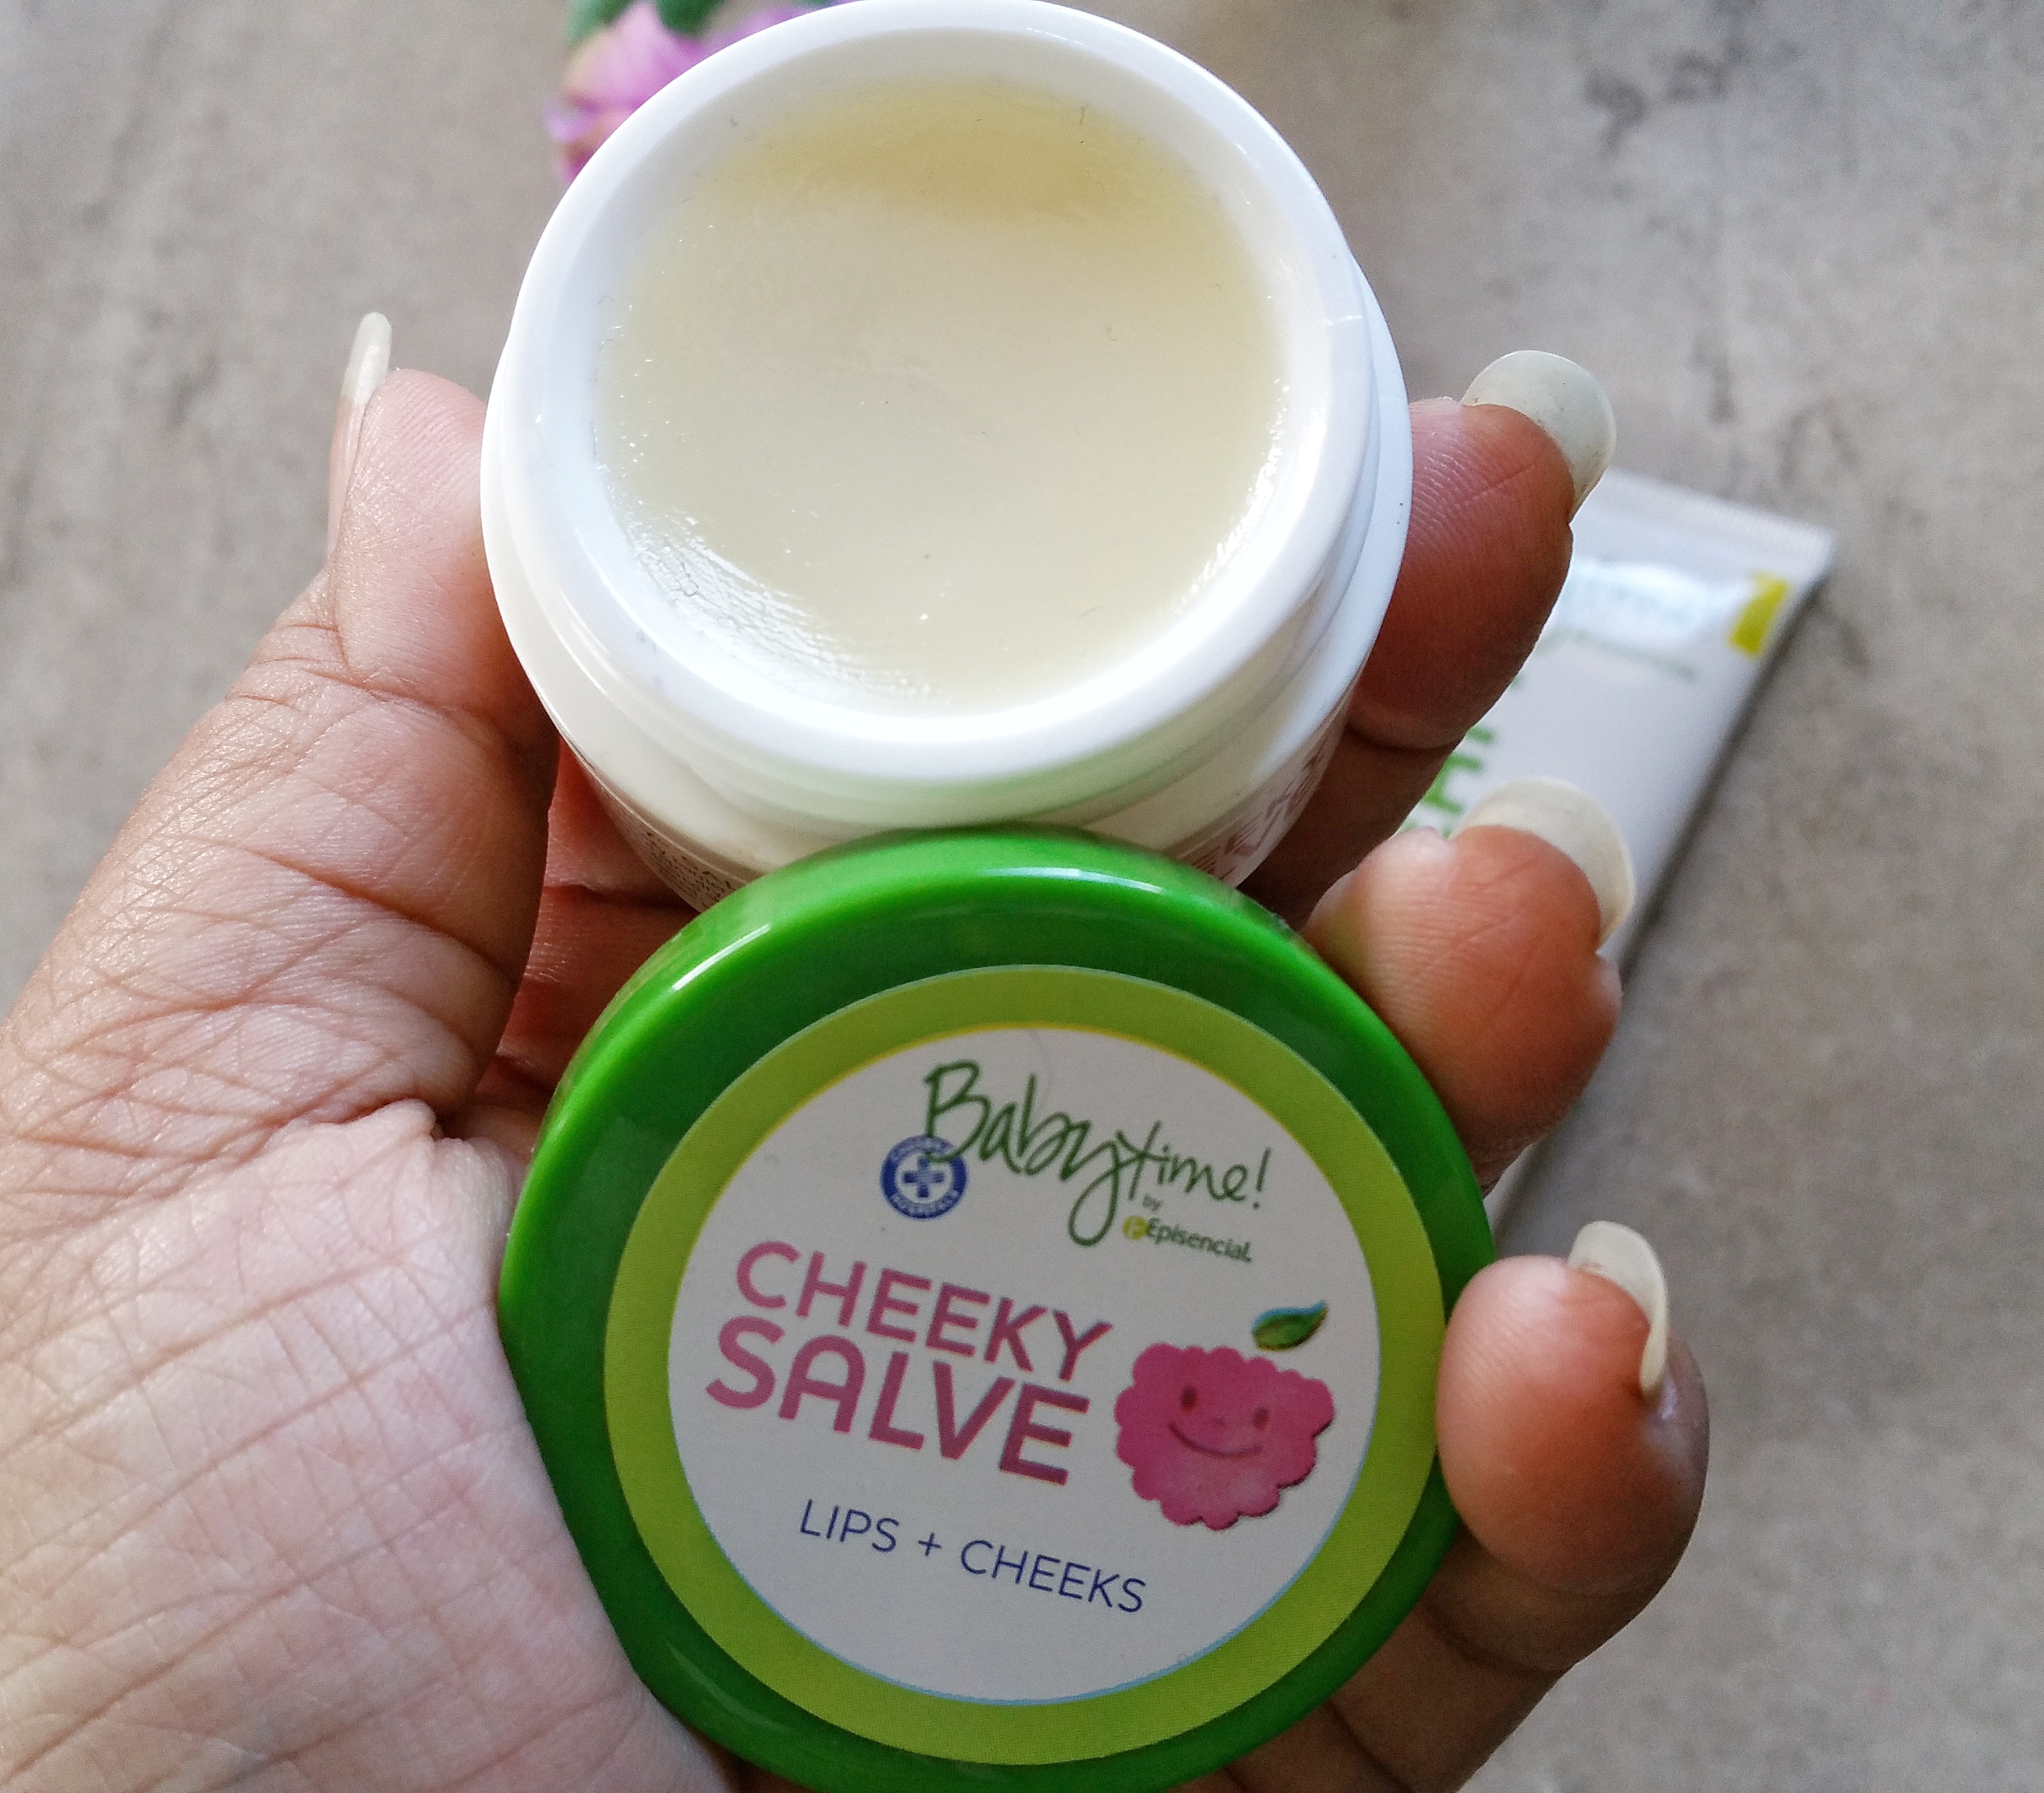 Babytime! by Episencial, babytime, cheeky salve, soothing cream, skin care, eczema, skin care for children, organic, organic skin care, natural skin care, all natural, beauty, body care, review, product review, beauty, 